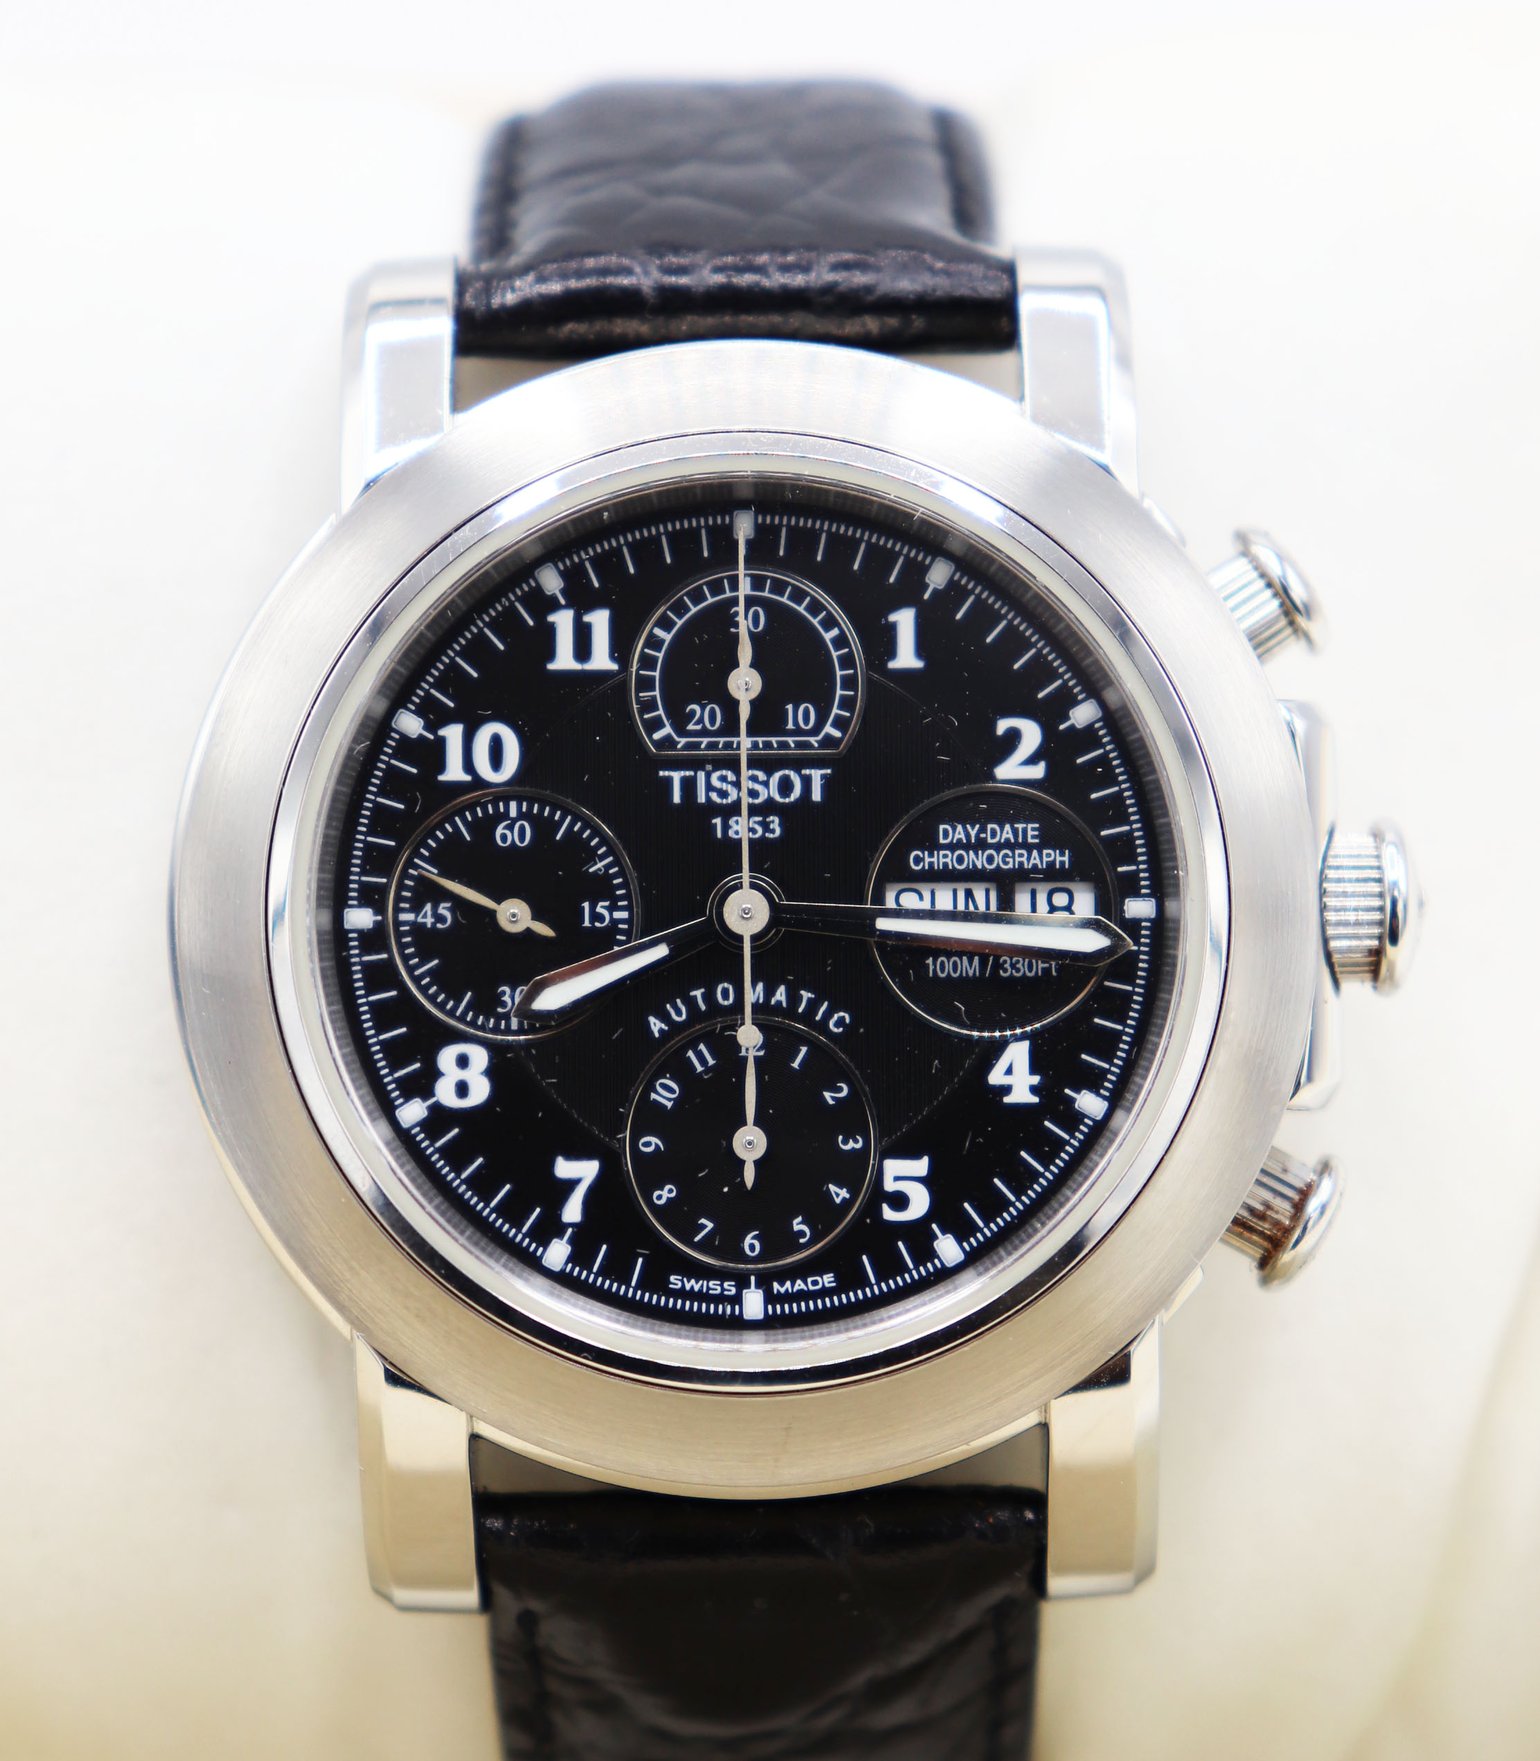 Screenplay Dishonesty actually tissot t lord chronograph valjoux 7750 ...